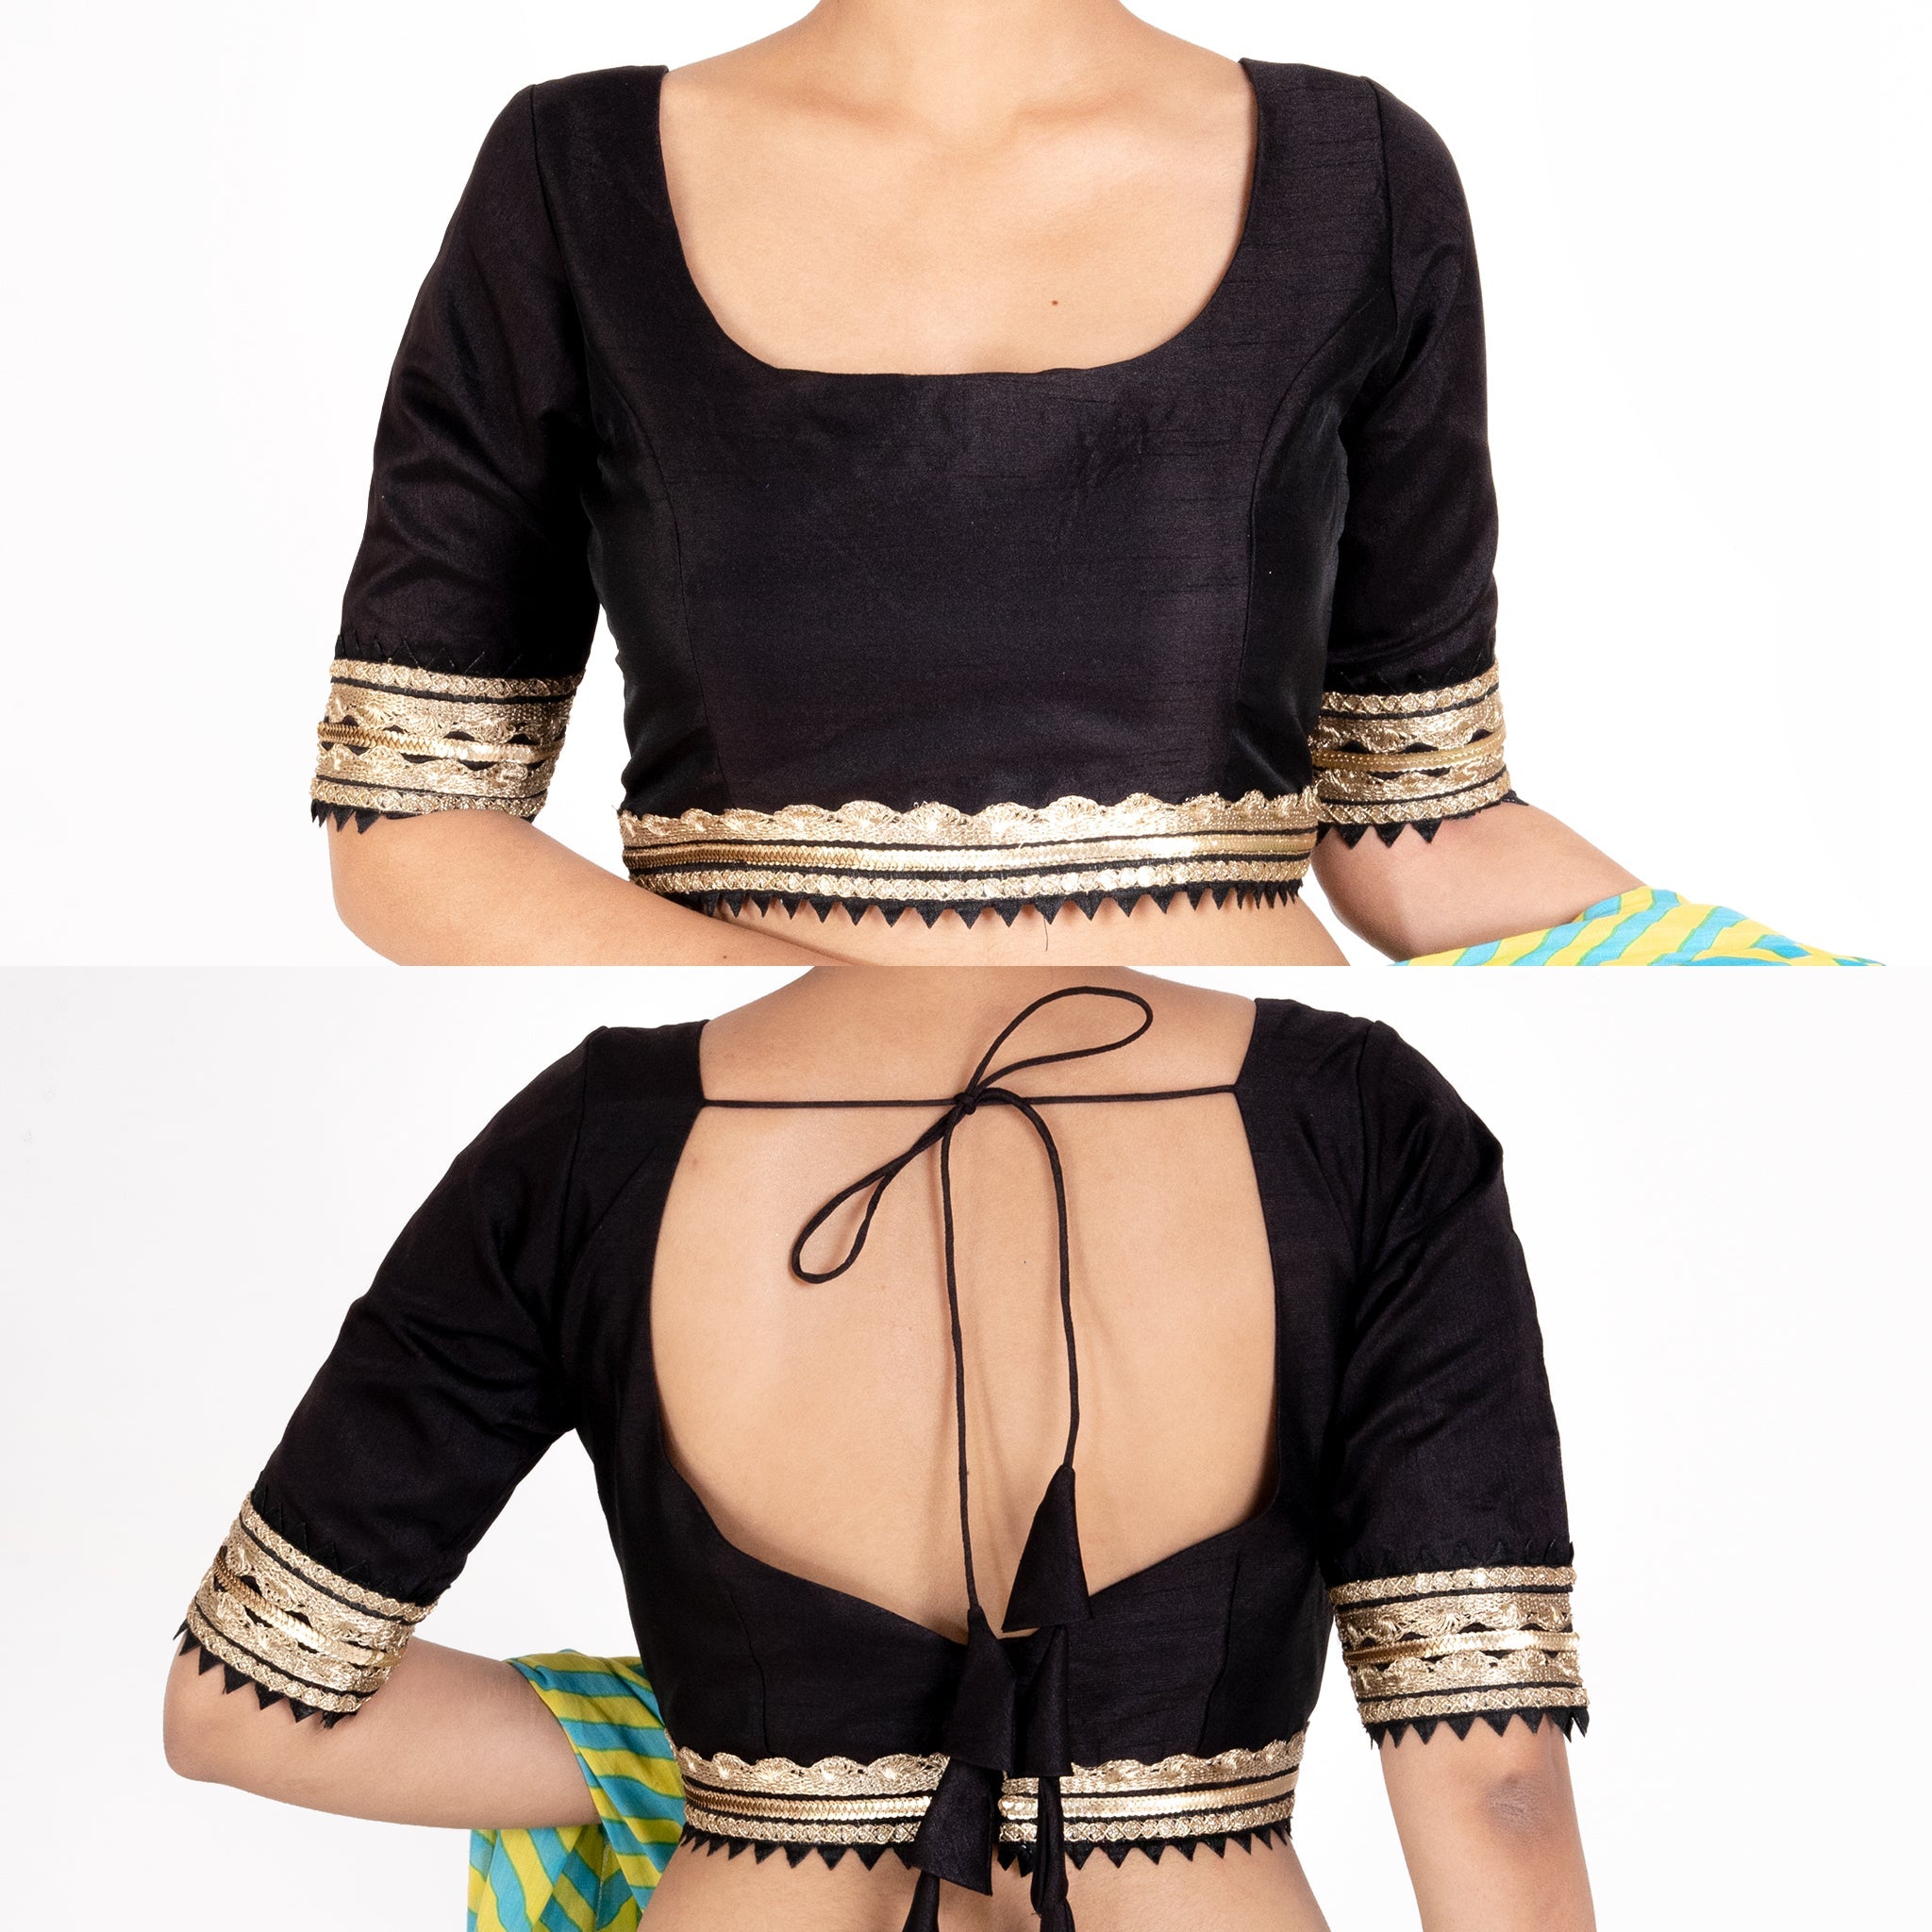 Women's Black Rawsilk Padded Blouse With Golden Lace Detailing - Boveee